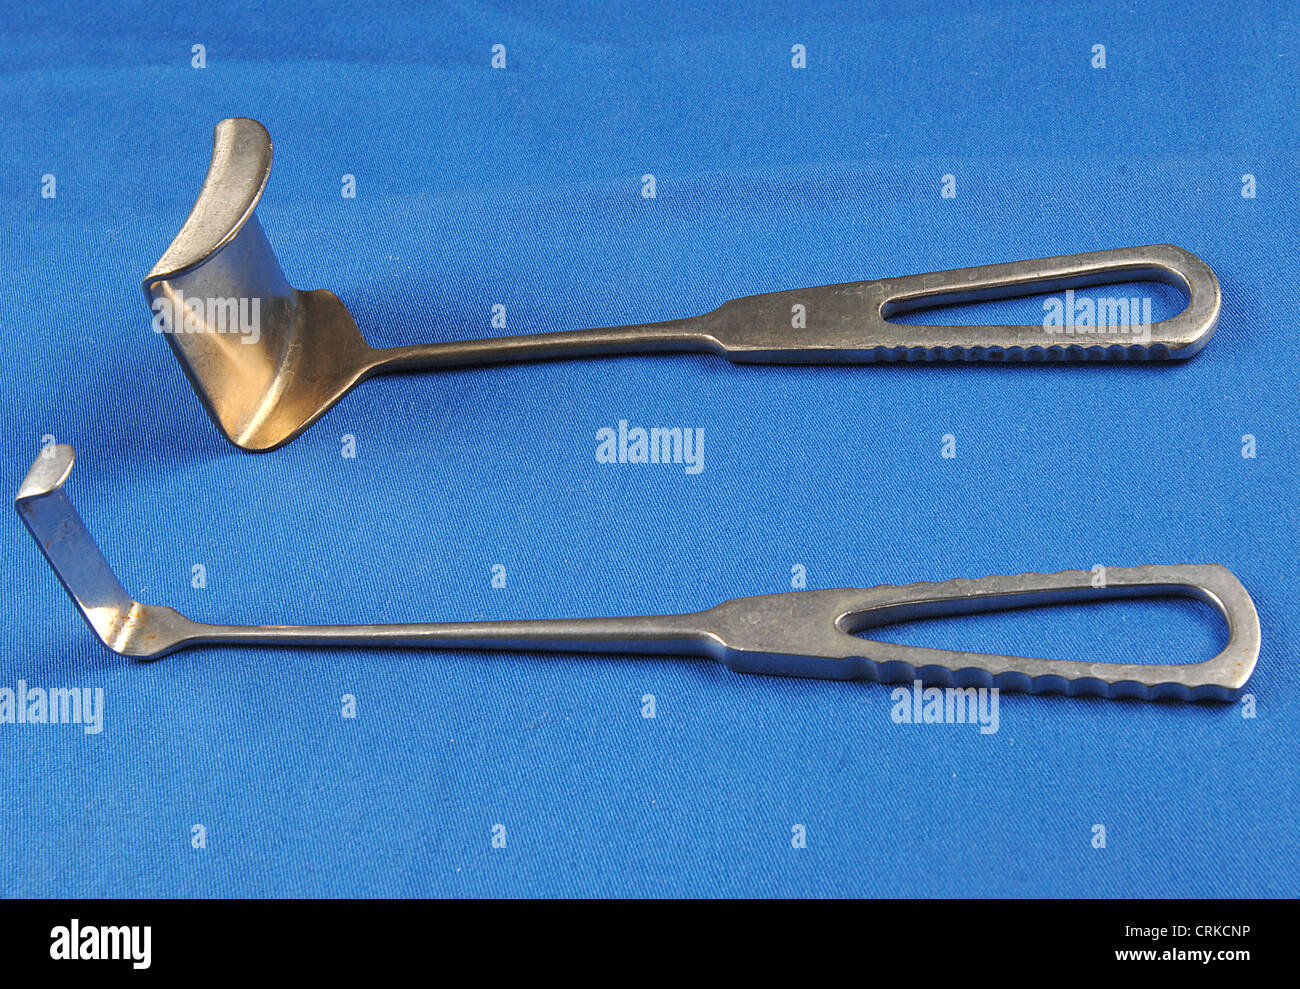 Metal Retractors on a blue background Stock Photo